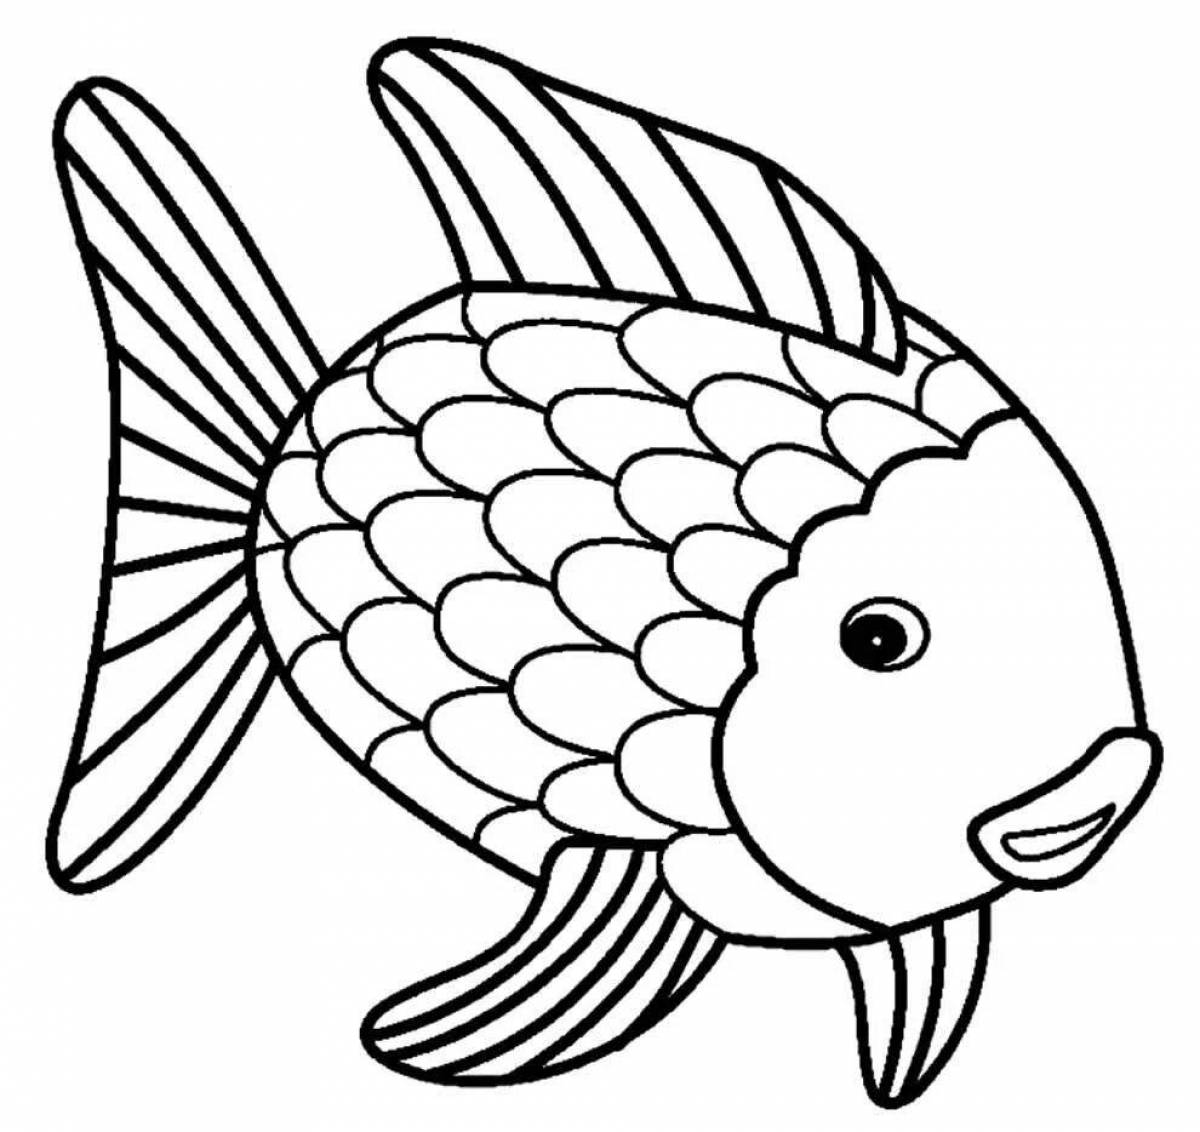 Attractive fish coloring book for 6-7 year olds